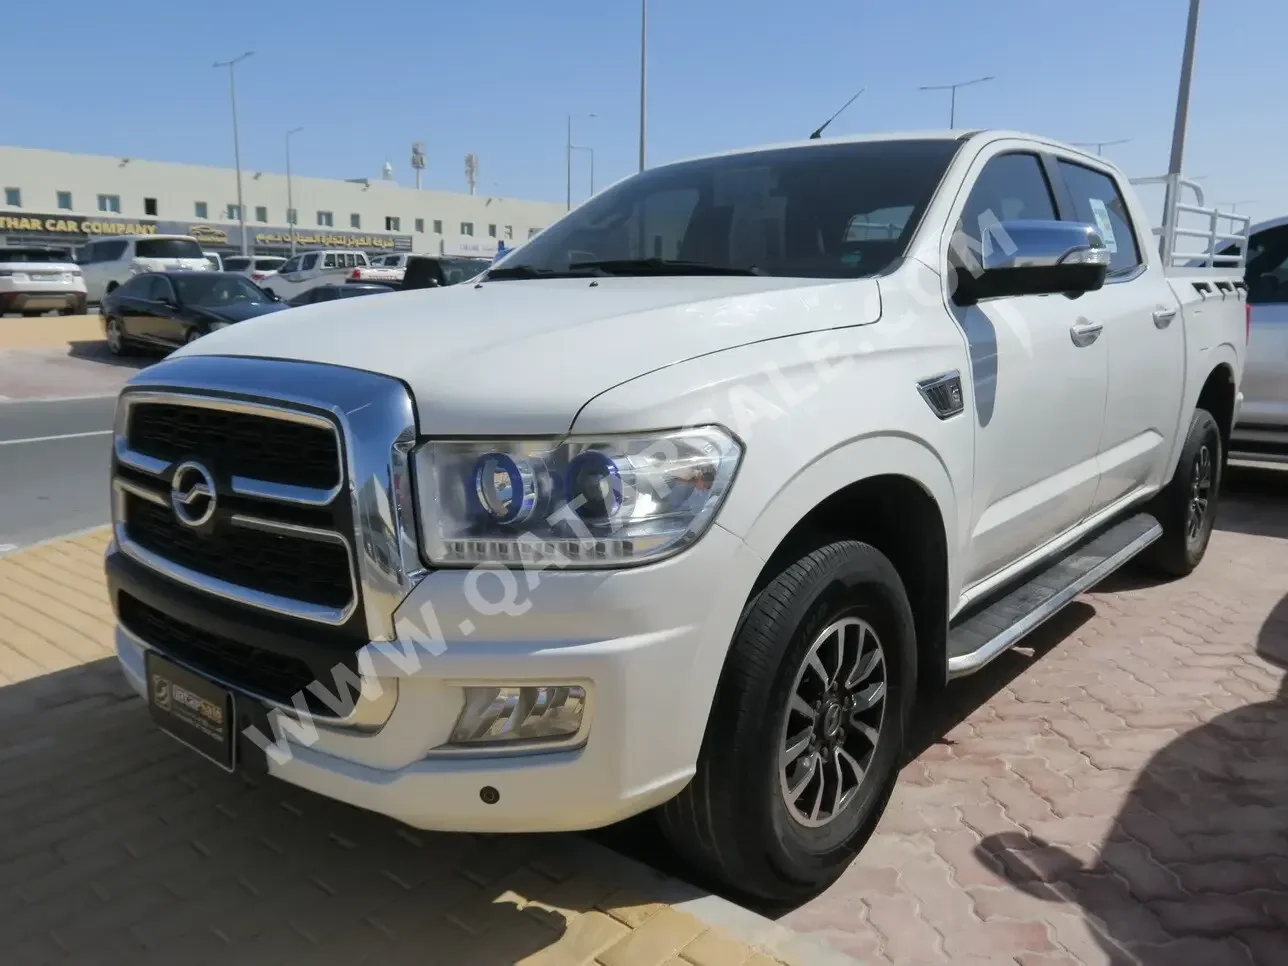 Zxauto  Terralord  2019  Manual  163,000 Km  4 Cylinder  Four Wheel Drive (4WD)  Pick Up  White